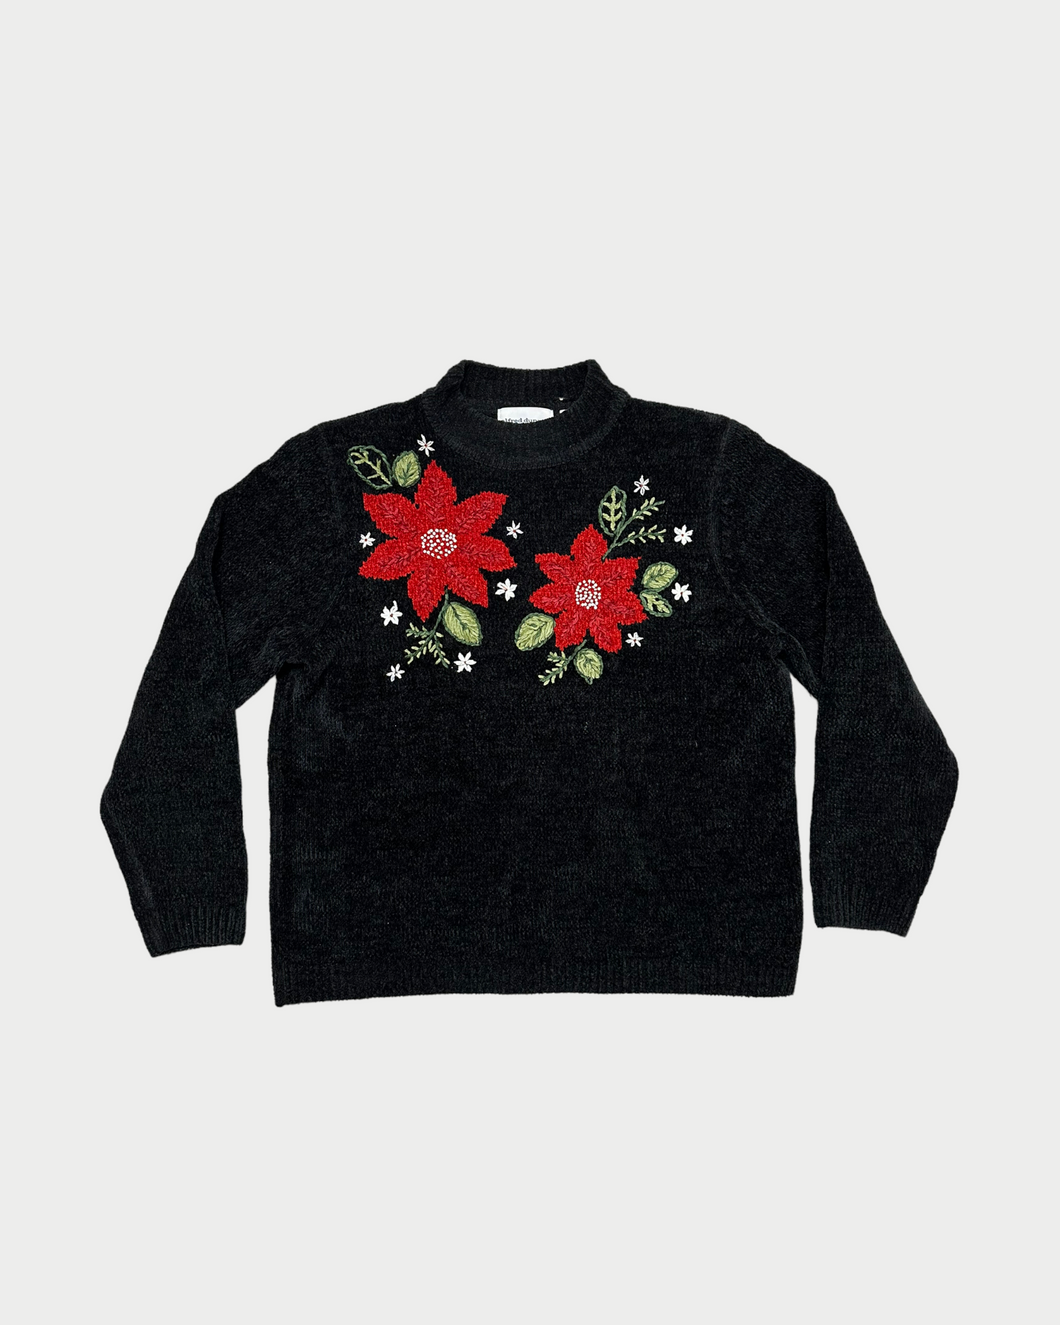 Alfred Dunner Black Poinsettia Sweater (M)